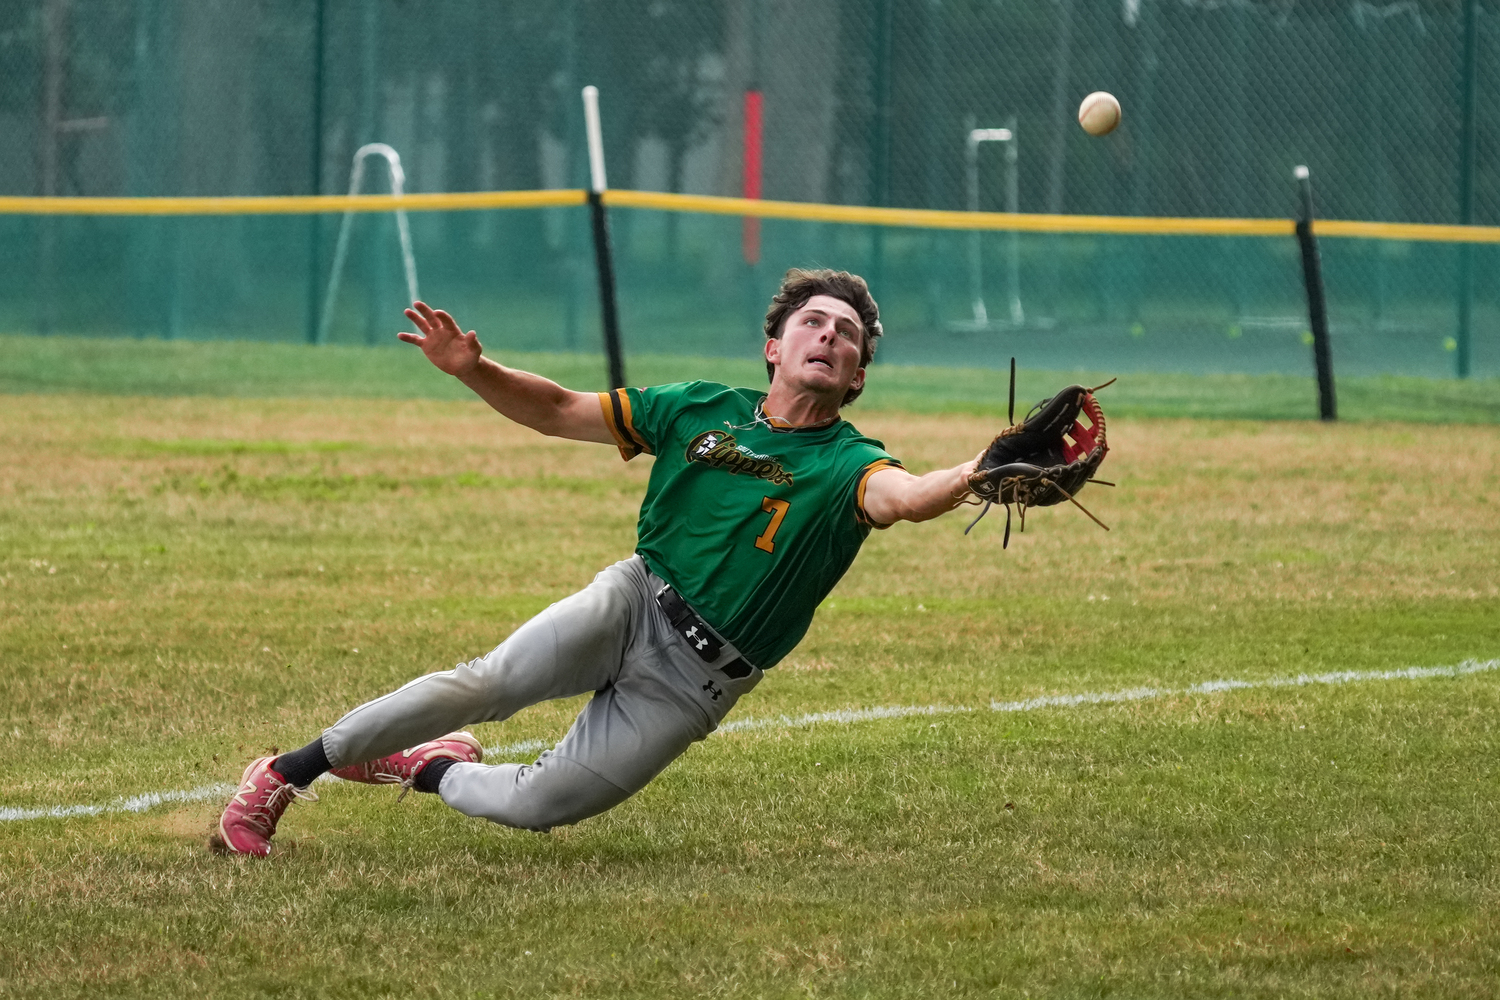 South Shore Clipper Joe Hackal (St. Josephs) went all out for this catch in foul territory.   RON ESPOSITO